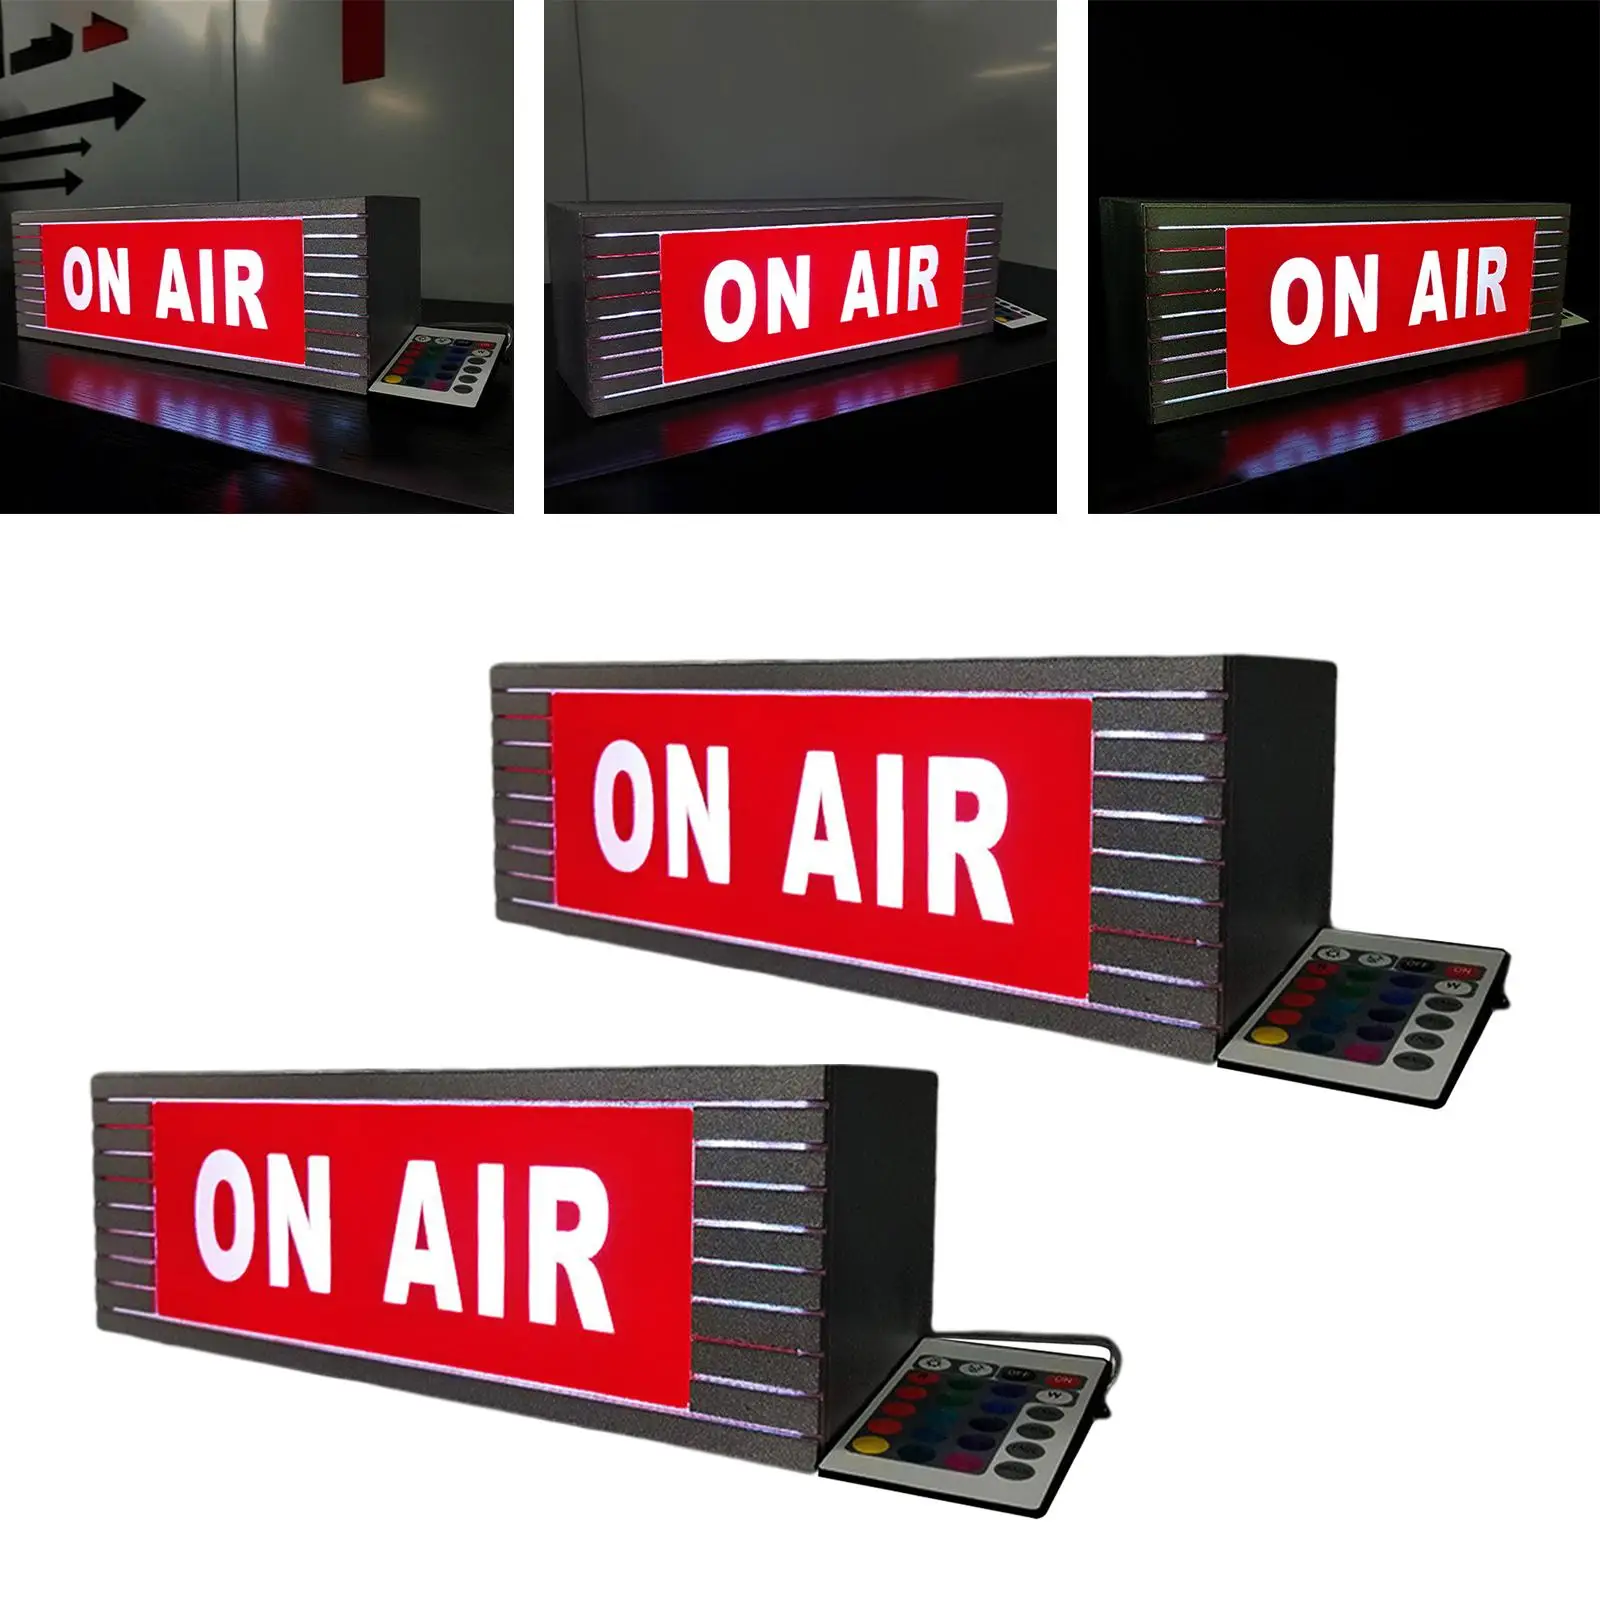 On Air Studio LED Neon Light Sign Box Remote Control Wall Decor Podcasting